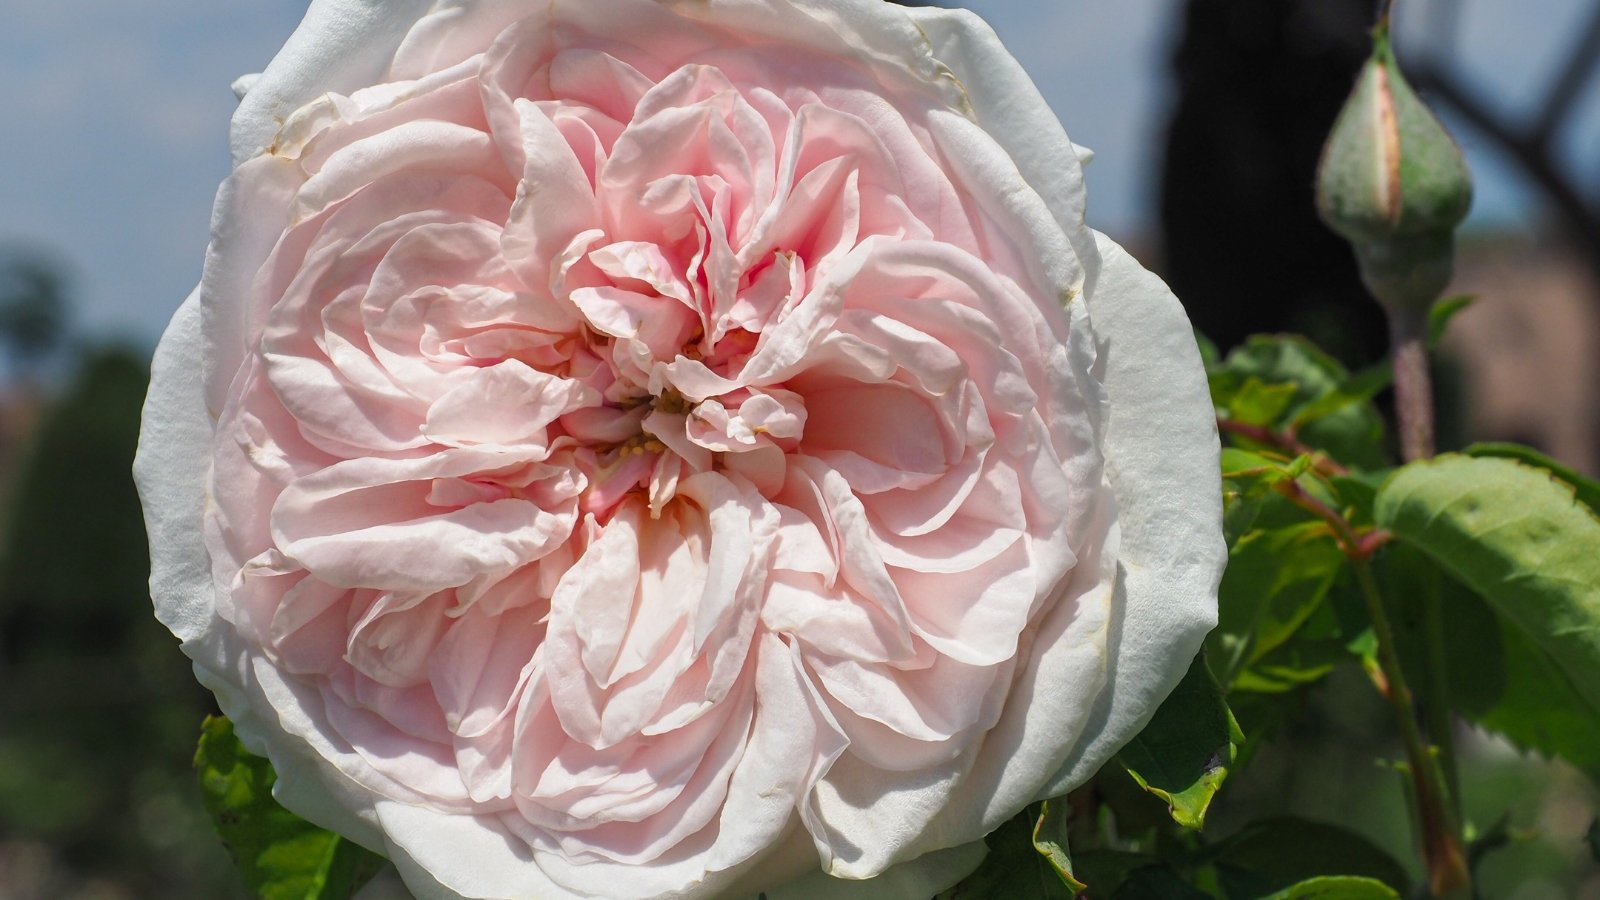 Rosa ‘Souvenir de la Malmaison’ features strong stems, lush green leaves, and large, double, blush pink flowers with a strong fragrance.